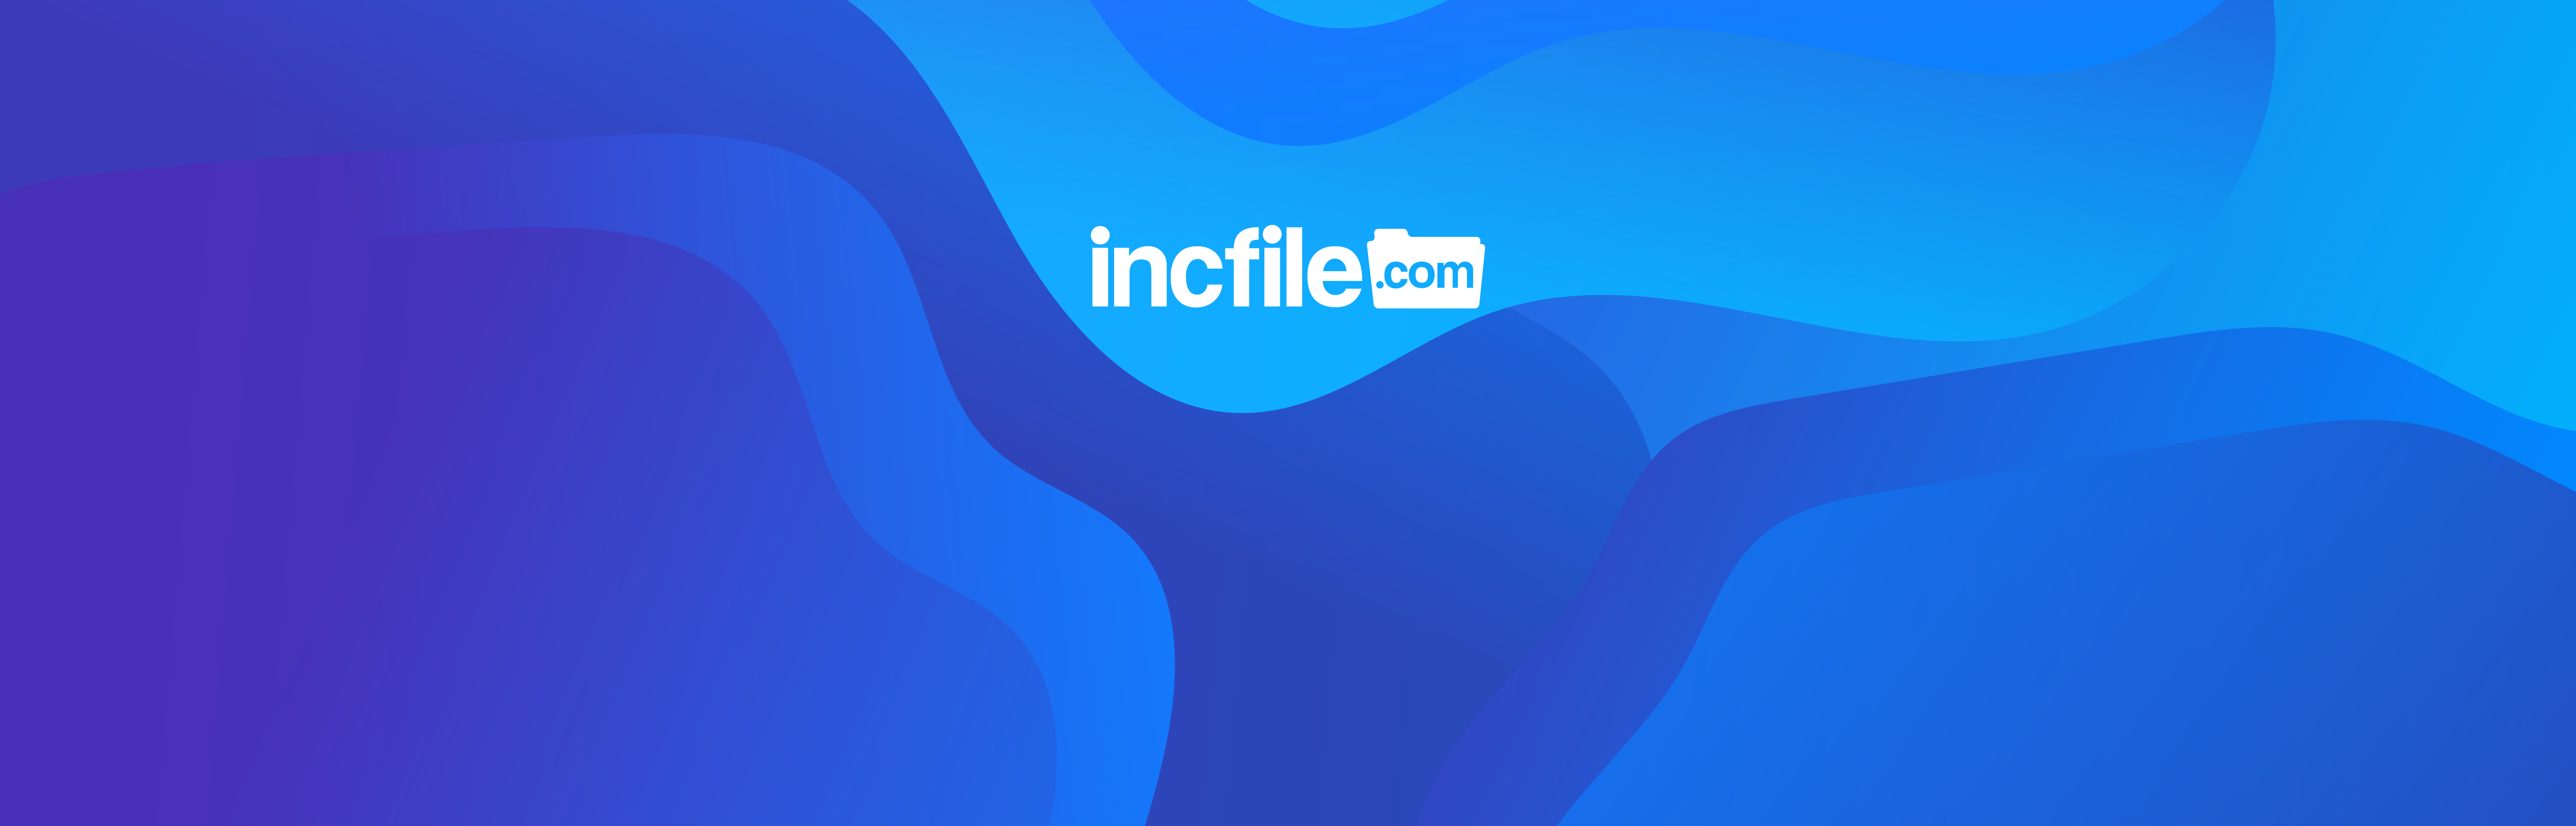 How Do I Fill Out The Member On Incfile